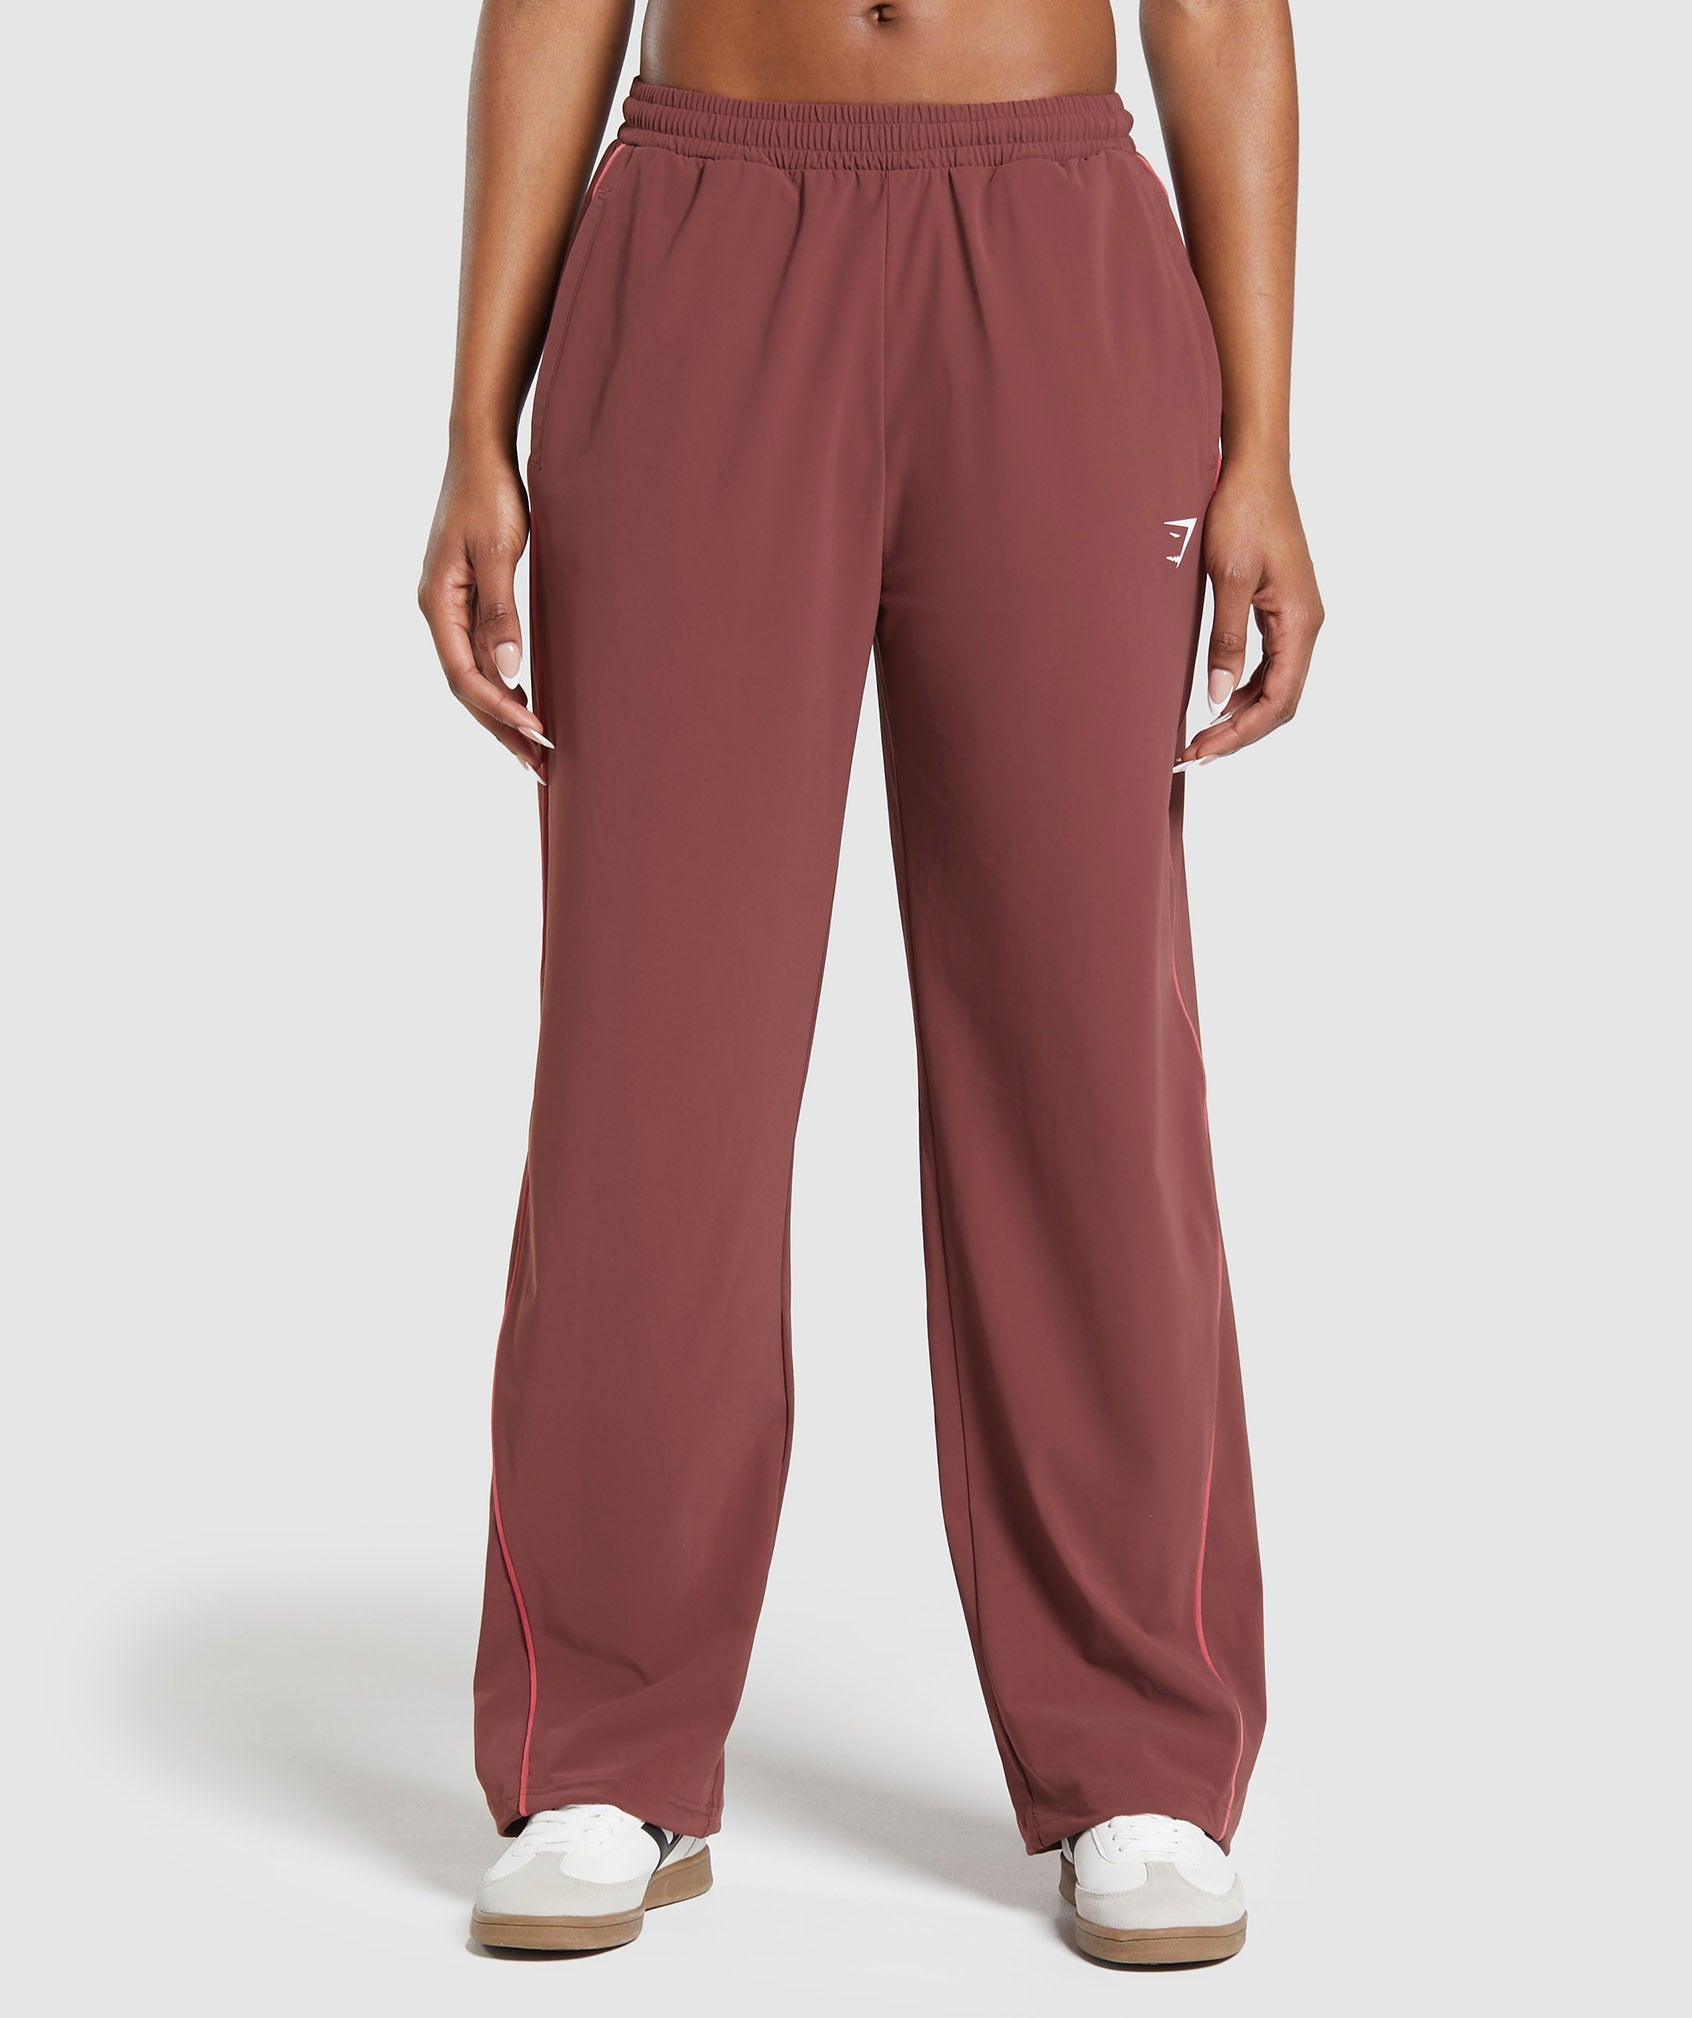 Stitch Feature Woven Pants in Burgundy Brown is out of stock